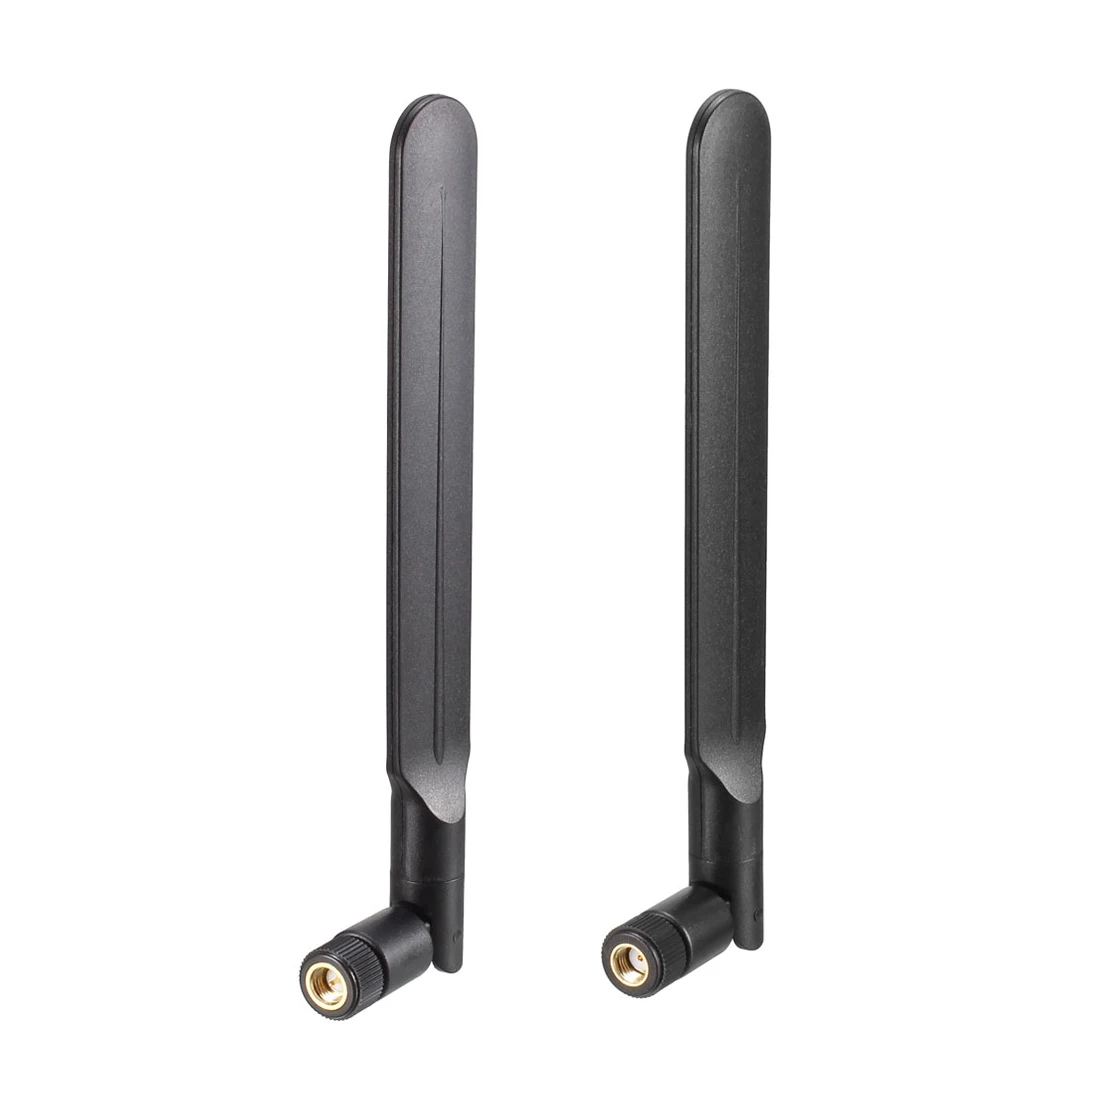 Uxcell GSM, GPRS, WCDMA LTE Antenas 3G 4G 9dBi 780-960/1710-2700MHz SMA/RP-SMA Male Connector Omni Virziena